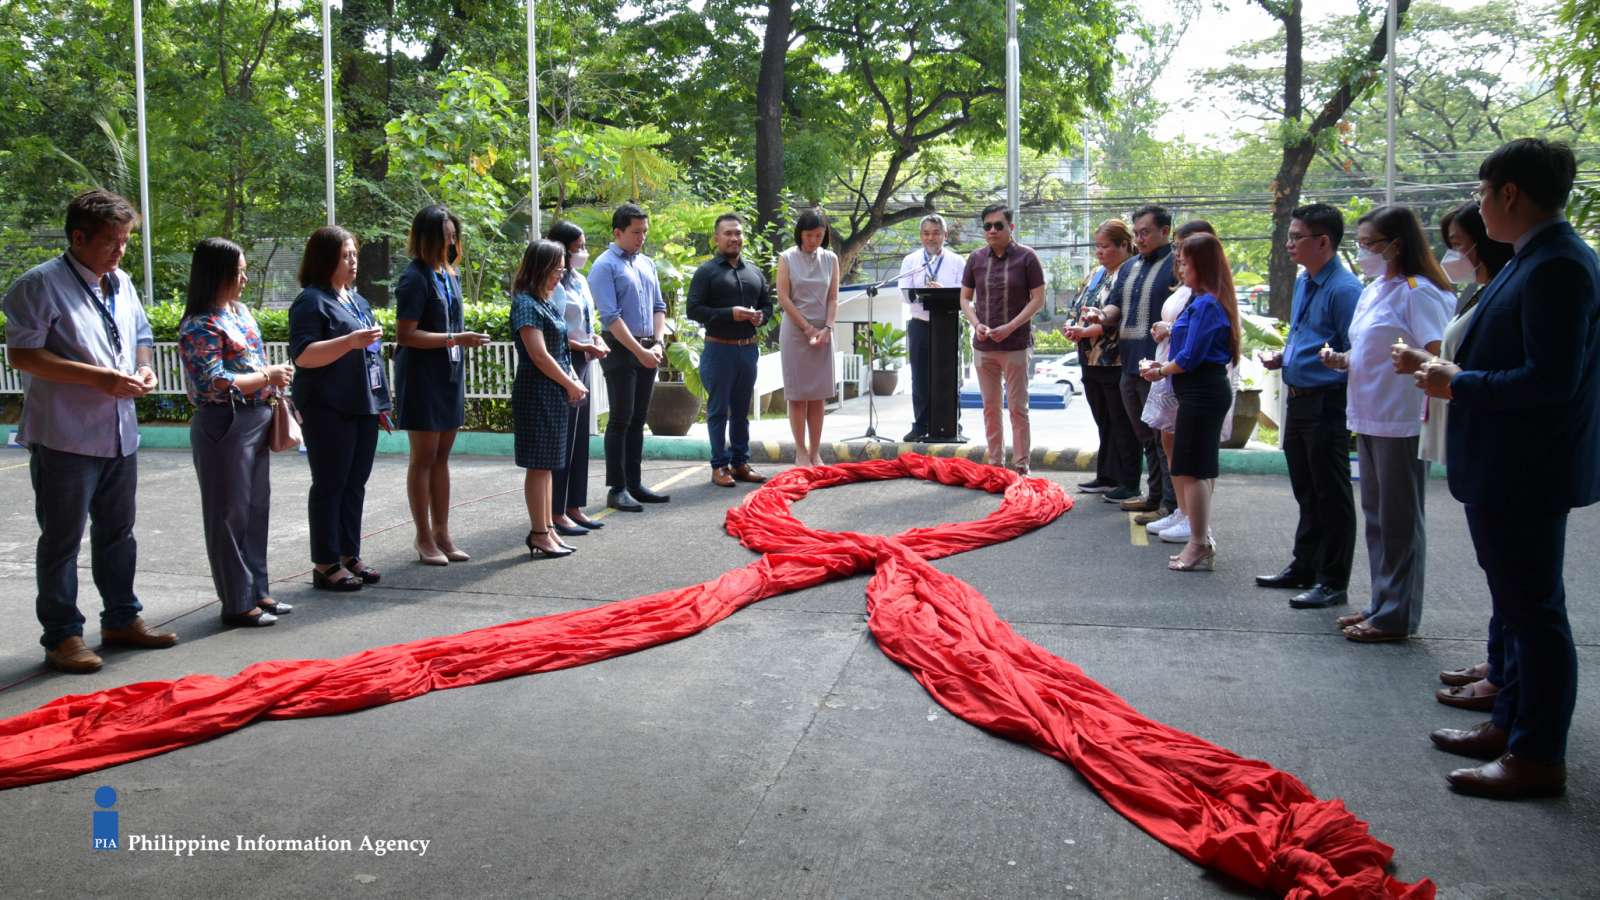 PIA lights candle to remember departed, bring hope for PLHIV